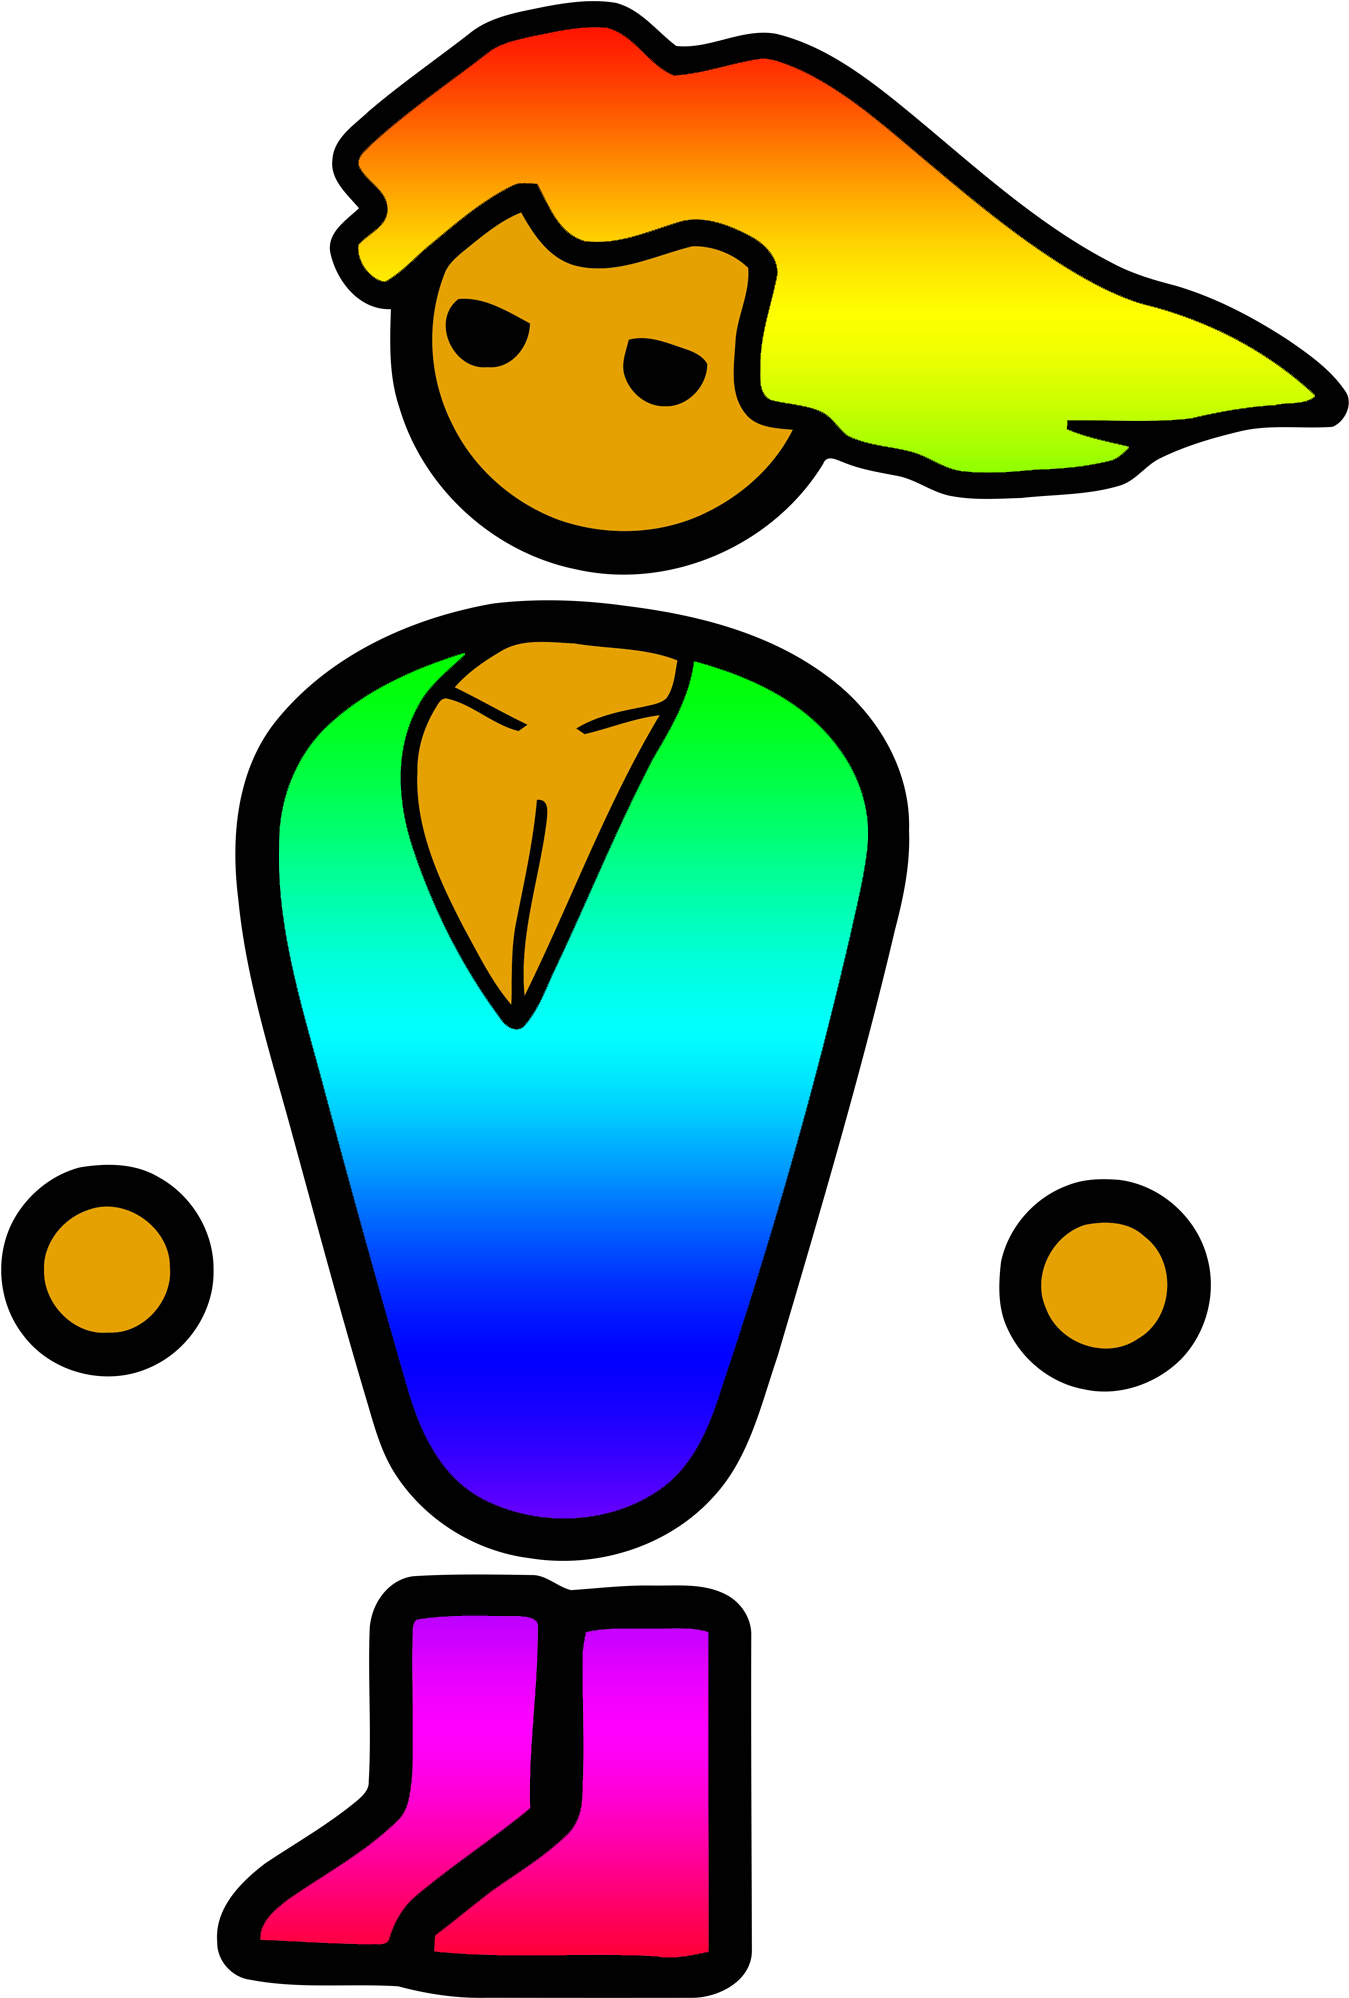 A Cartoon Of A Person With A Exclamation Mark